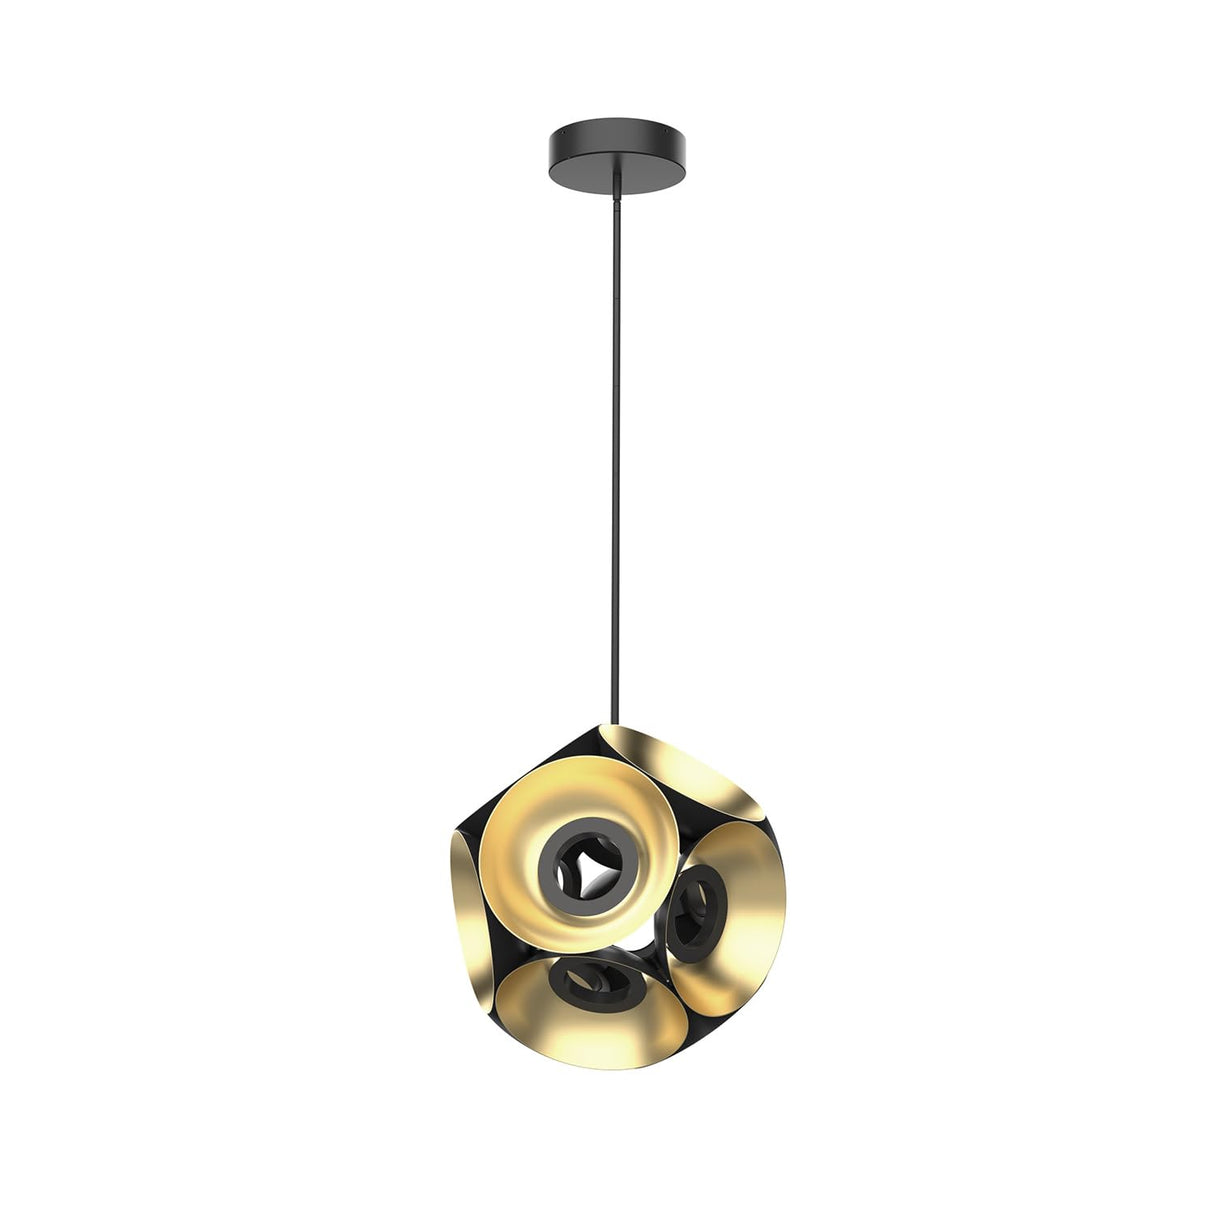 Kuzco CH51224-BK/GD MAGELLAN 24" CHANDELIER OUTER BLACK INNER GOLD METAL SHADE 95W 120VAC WITH LED DRIVER 3000K 90CRI